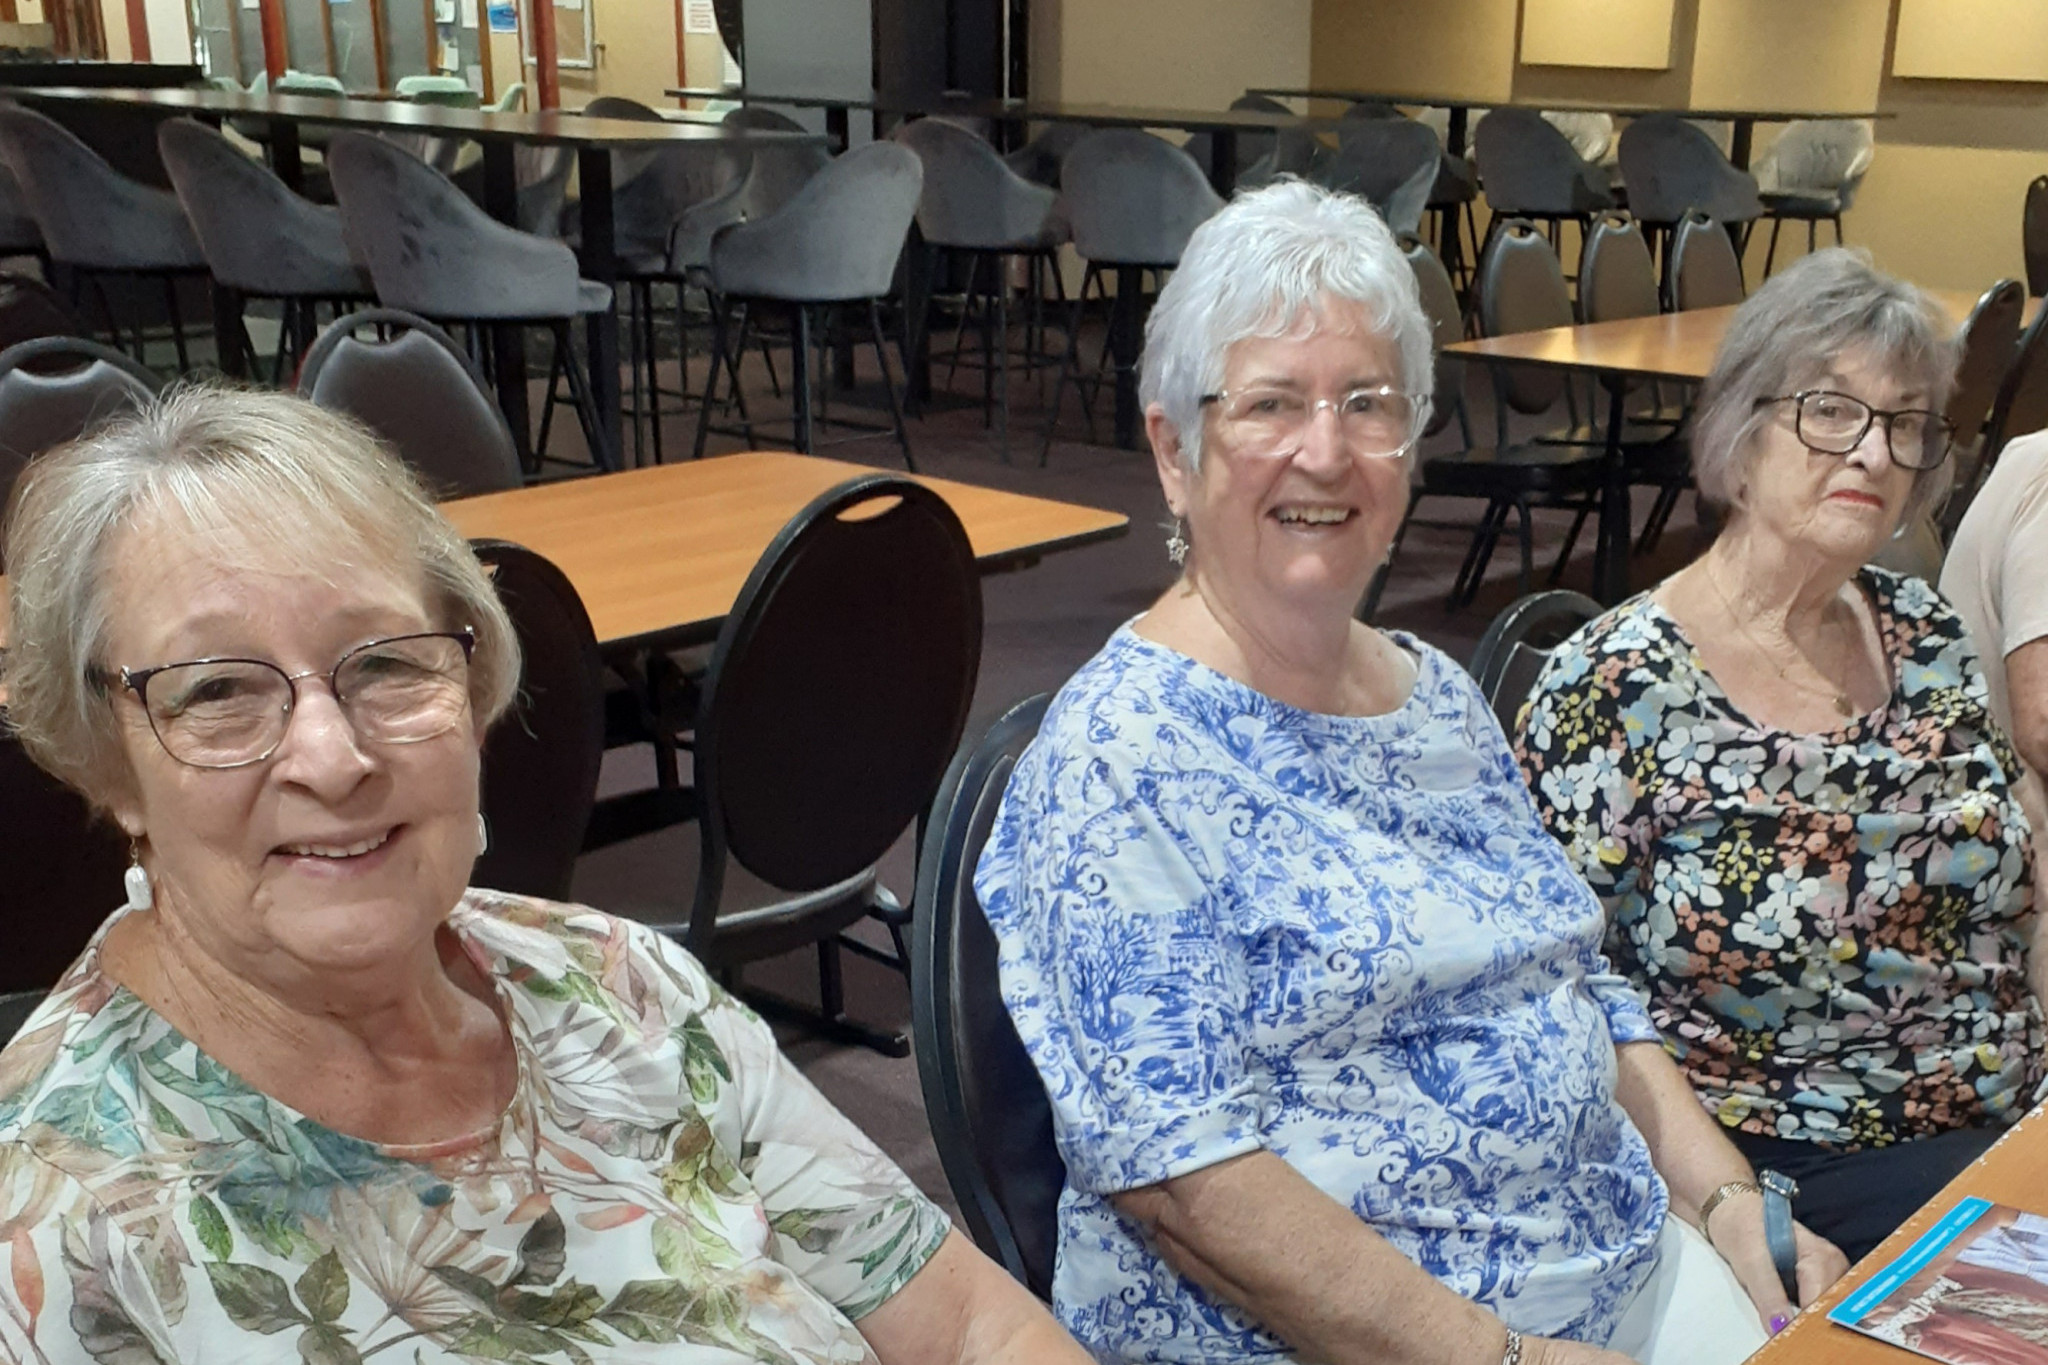 Bev Rogers, Edie Wlodarczyk, and Irene Whalan attended the DANS’ information session. Photos supplied.